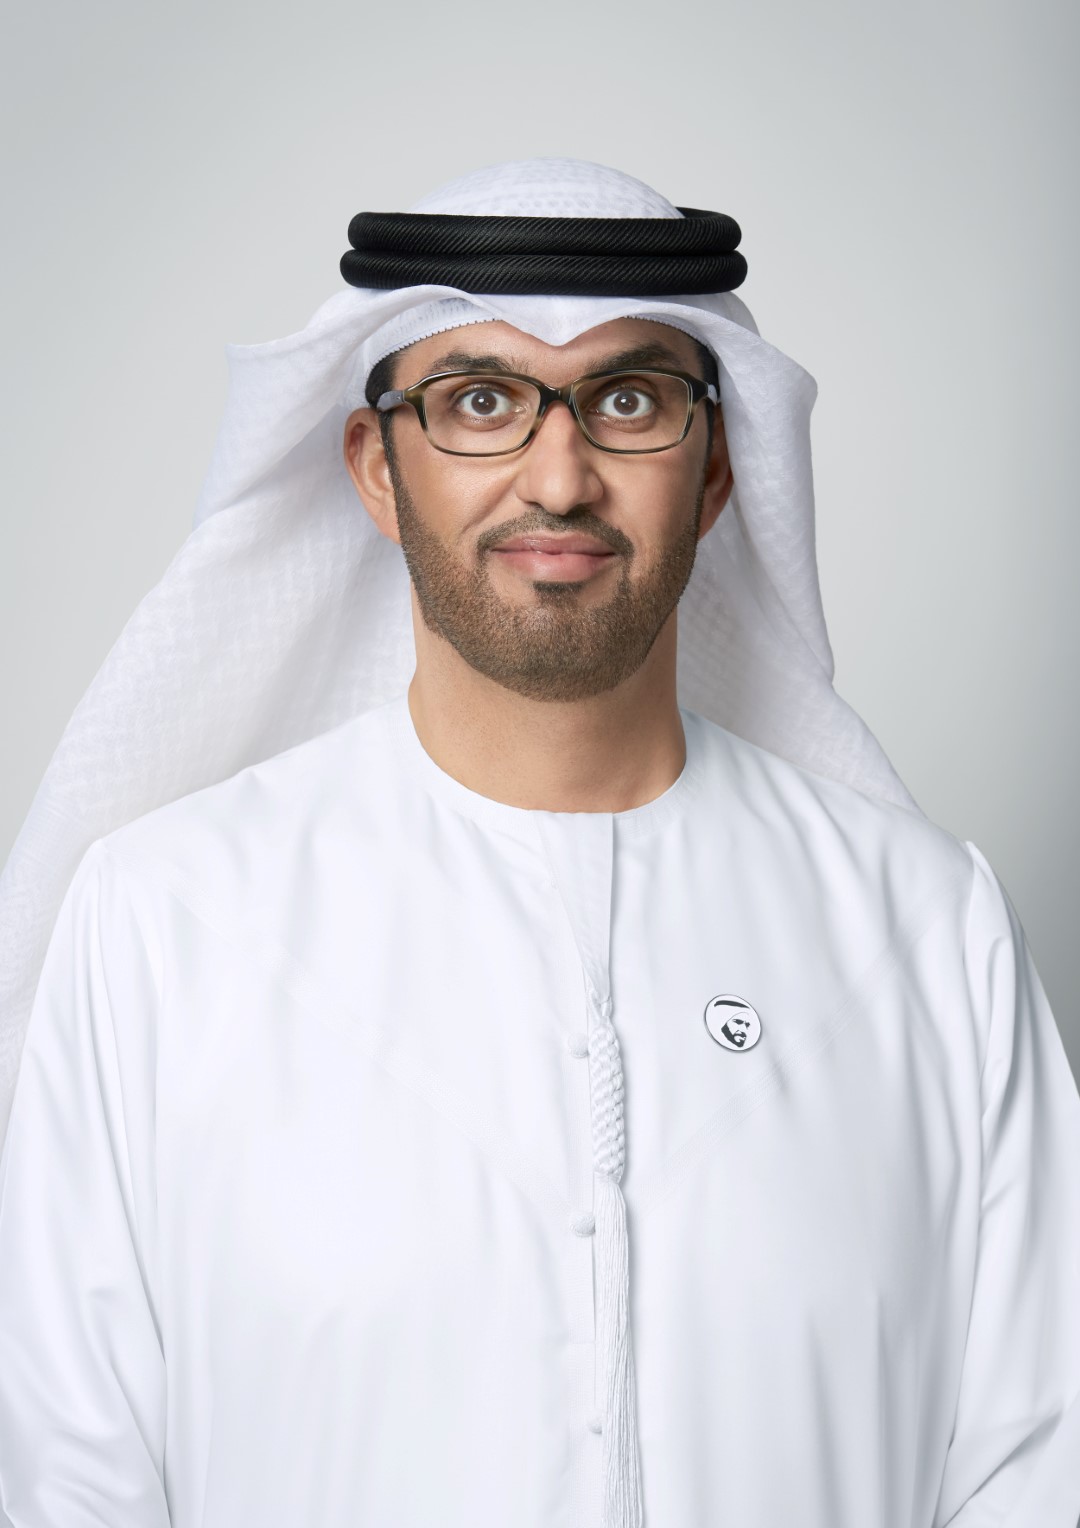 ADNOC Outlines Technology Leadership Ambition At First Innovation Week